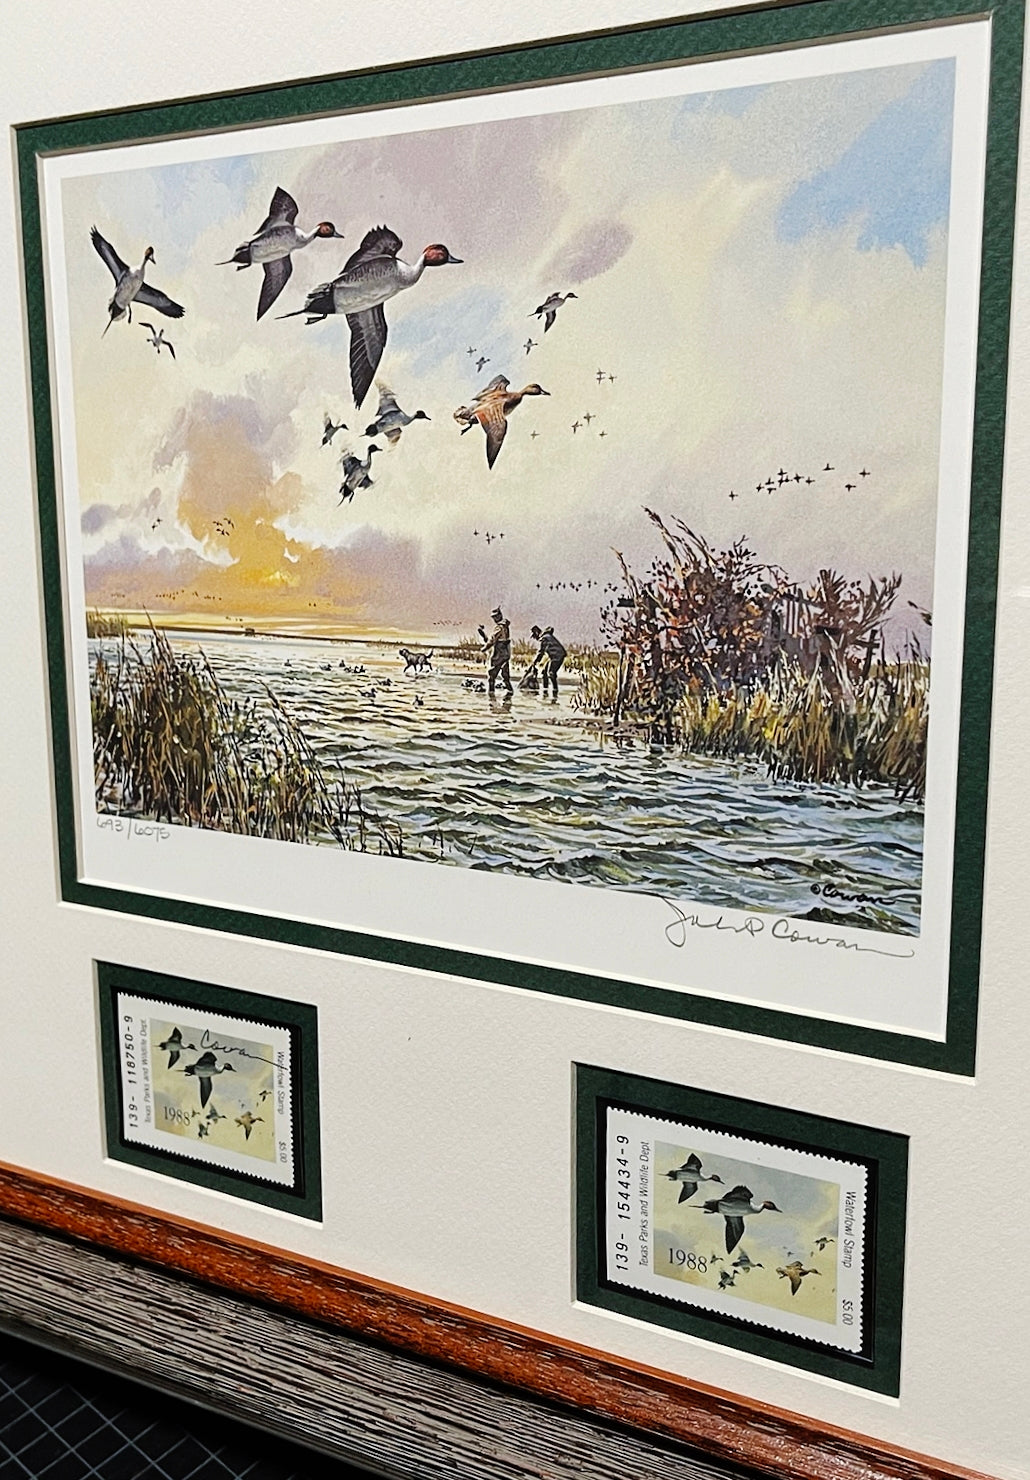 1988 Pennsylvania Duck Stamp Waterfowl Management by Artist Ned